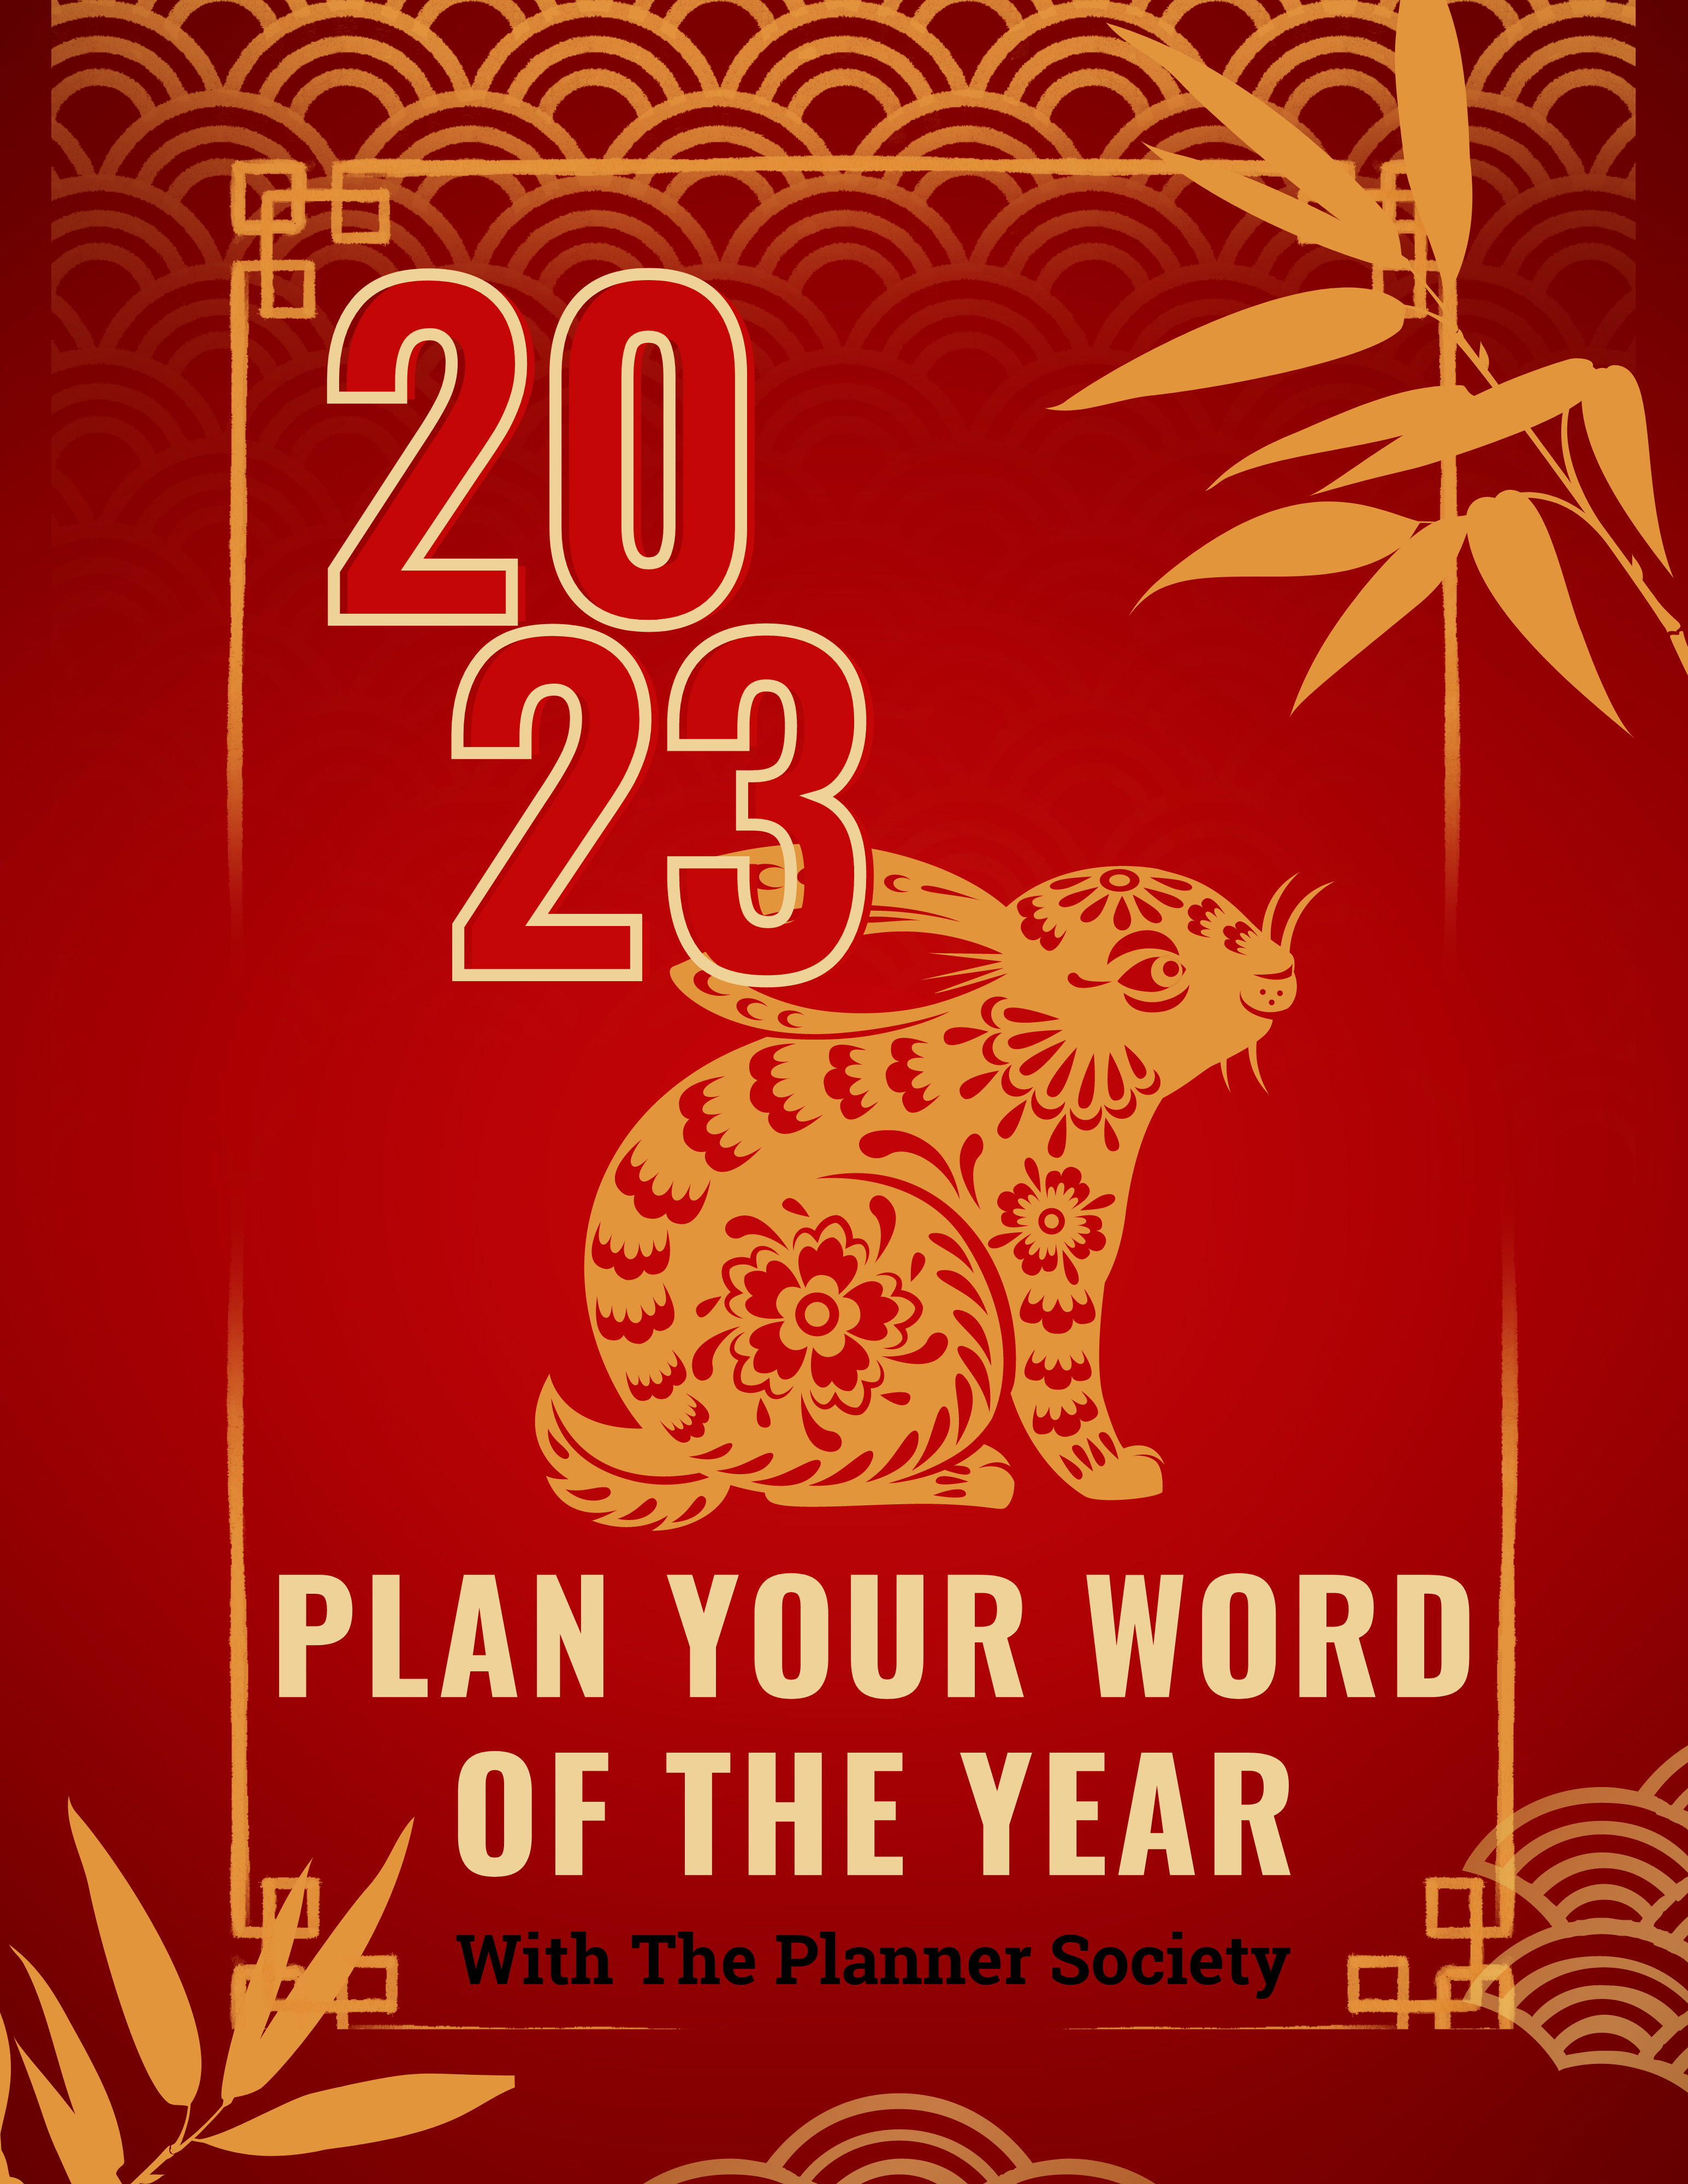 Plan Your Word of the Year with the Planner Society 2023 Decorative Rabbit with Leaves in corners